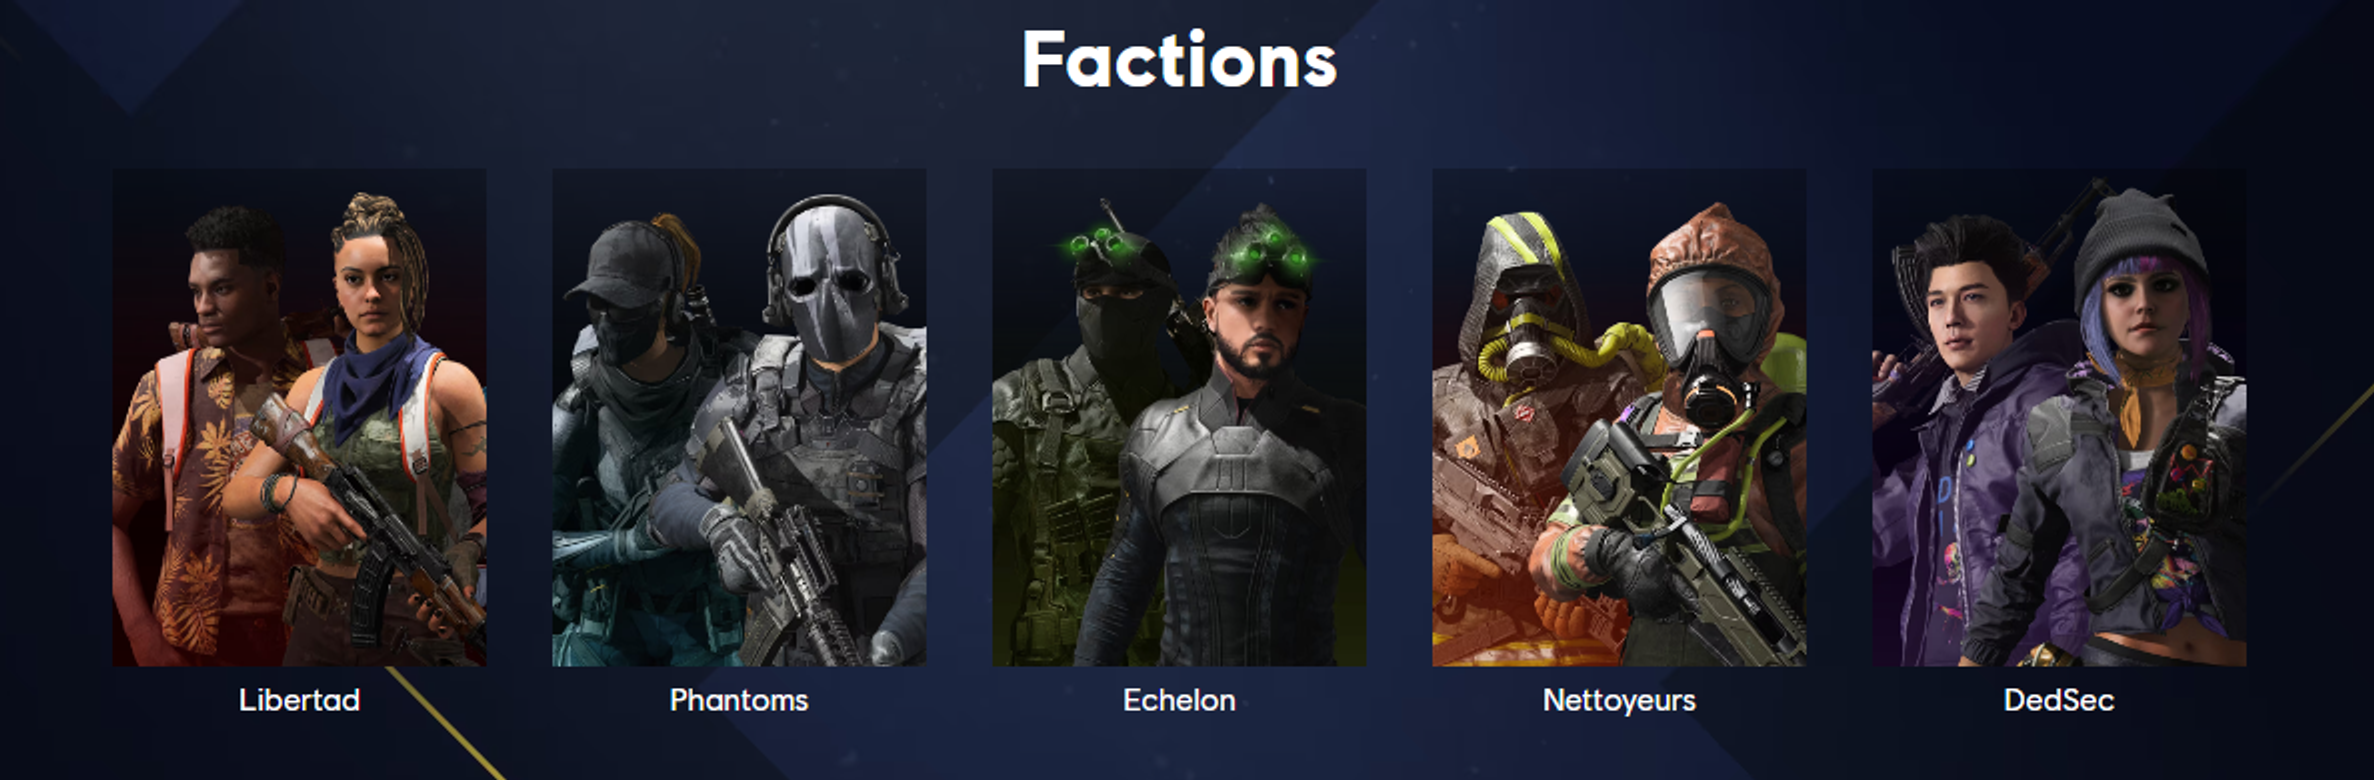 factions-xdefiant